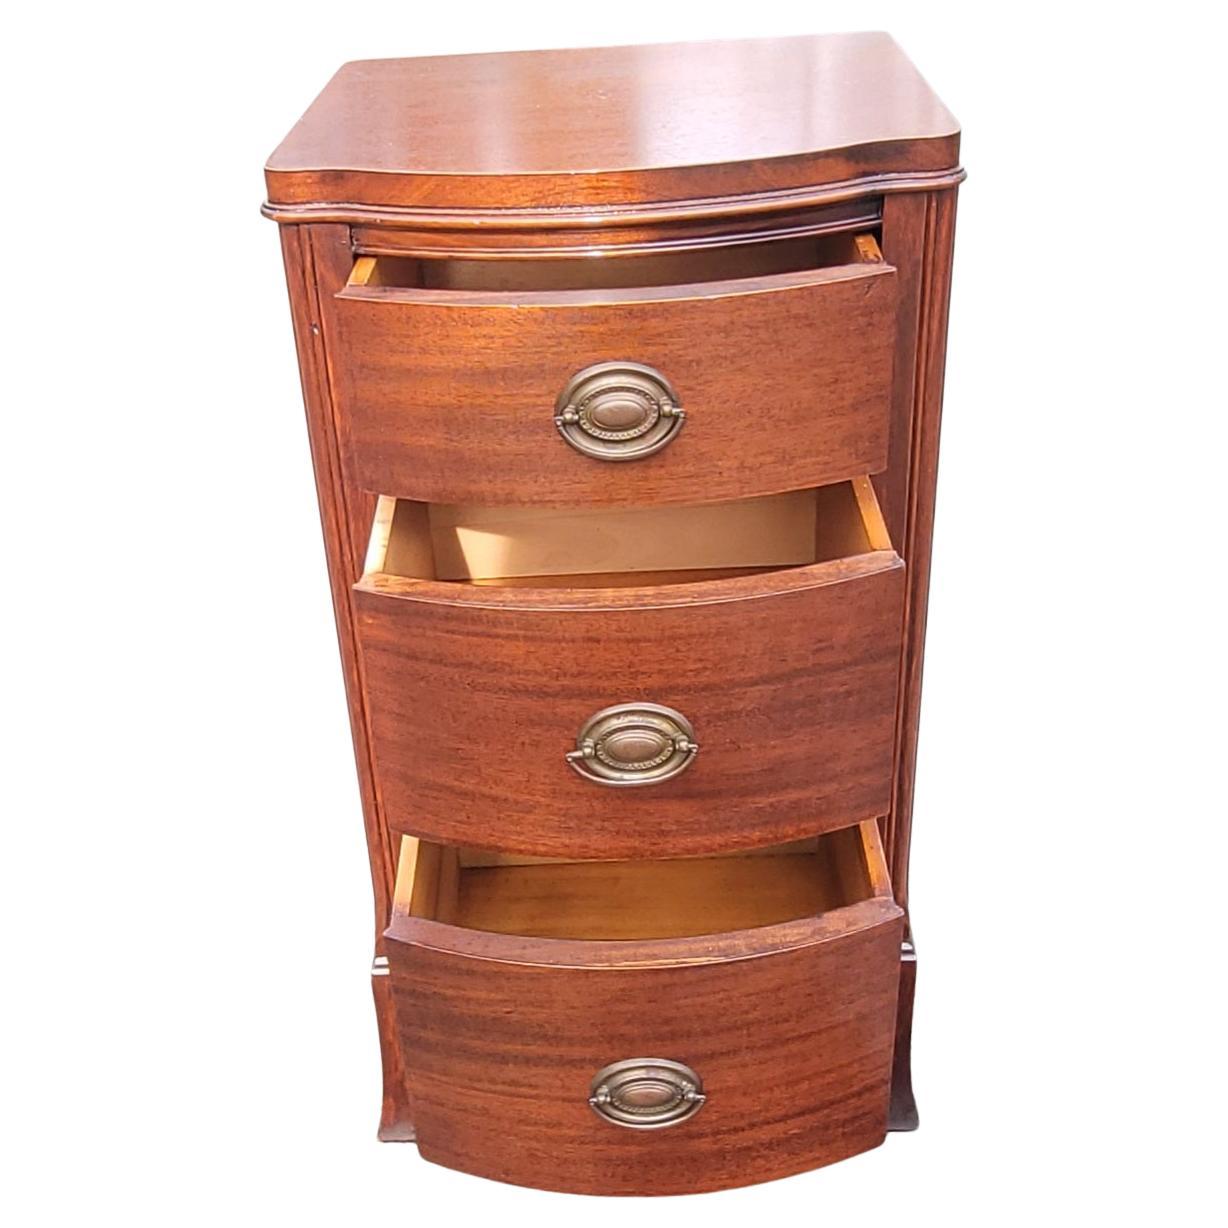 19th Century Federal Bowfront Mahogany Bedside Chest Nightstand In Good Condition For Sale In Germantown, MD